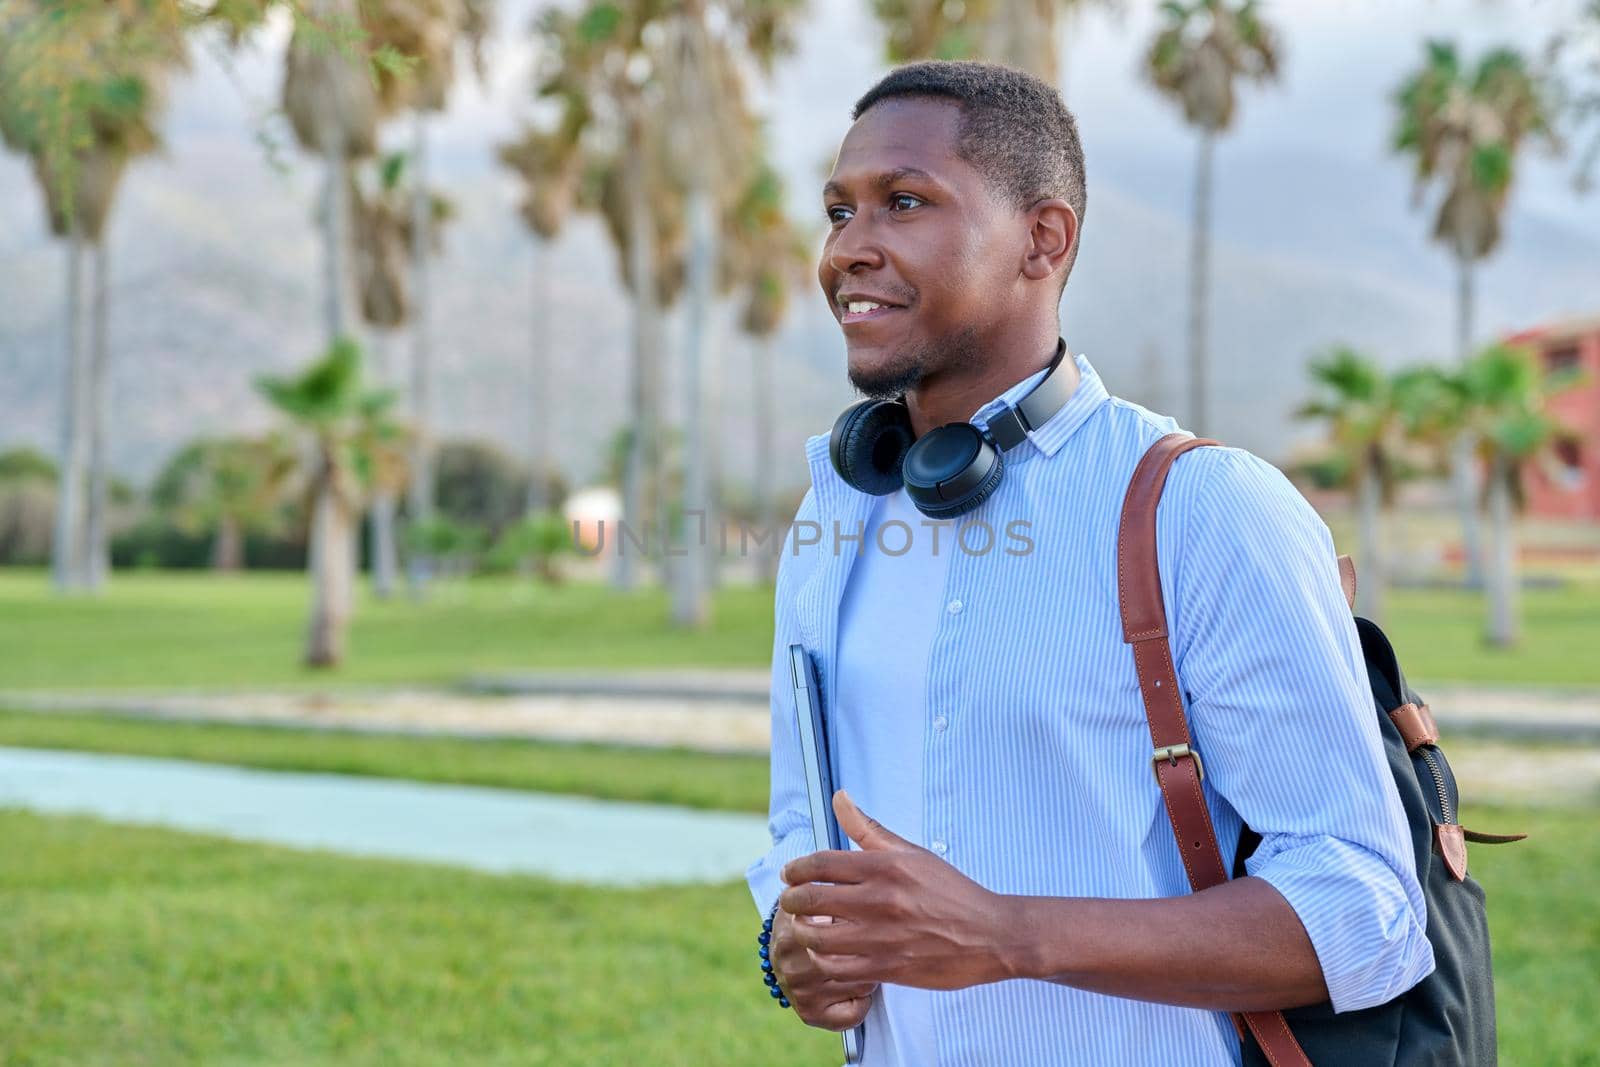 Outdoor portrait of young man with laptop headphones and backpack. African male adult student, creative freelancer, businessmen in tropical park. E-learning, online technologies, education, business